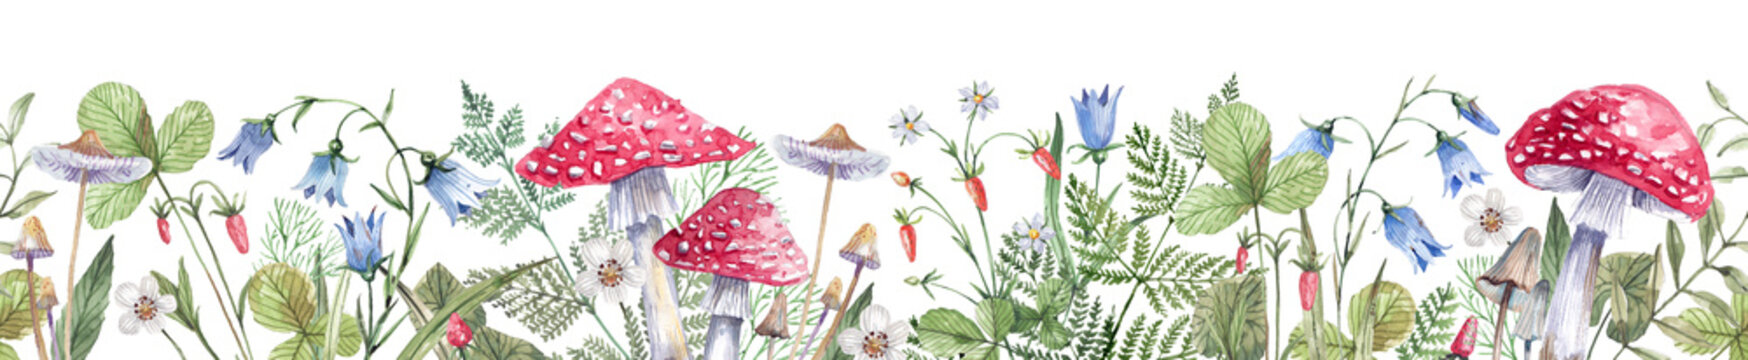 Seamless, horizontal border with wild strawberry flowers and berries, bluebells, field herbs and fly agaric ,on a white background. Endless, watercolor floral illustration for banners, wallpapers